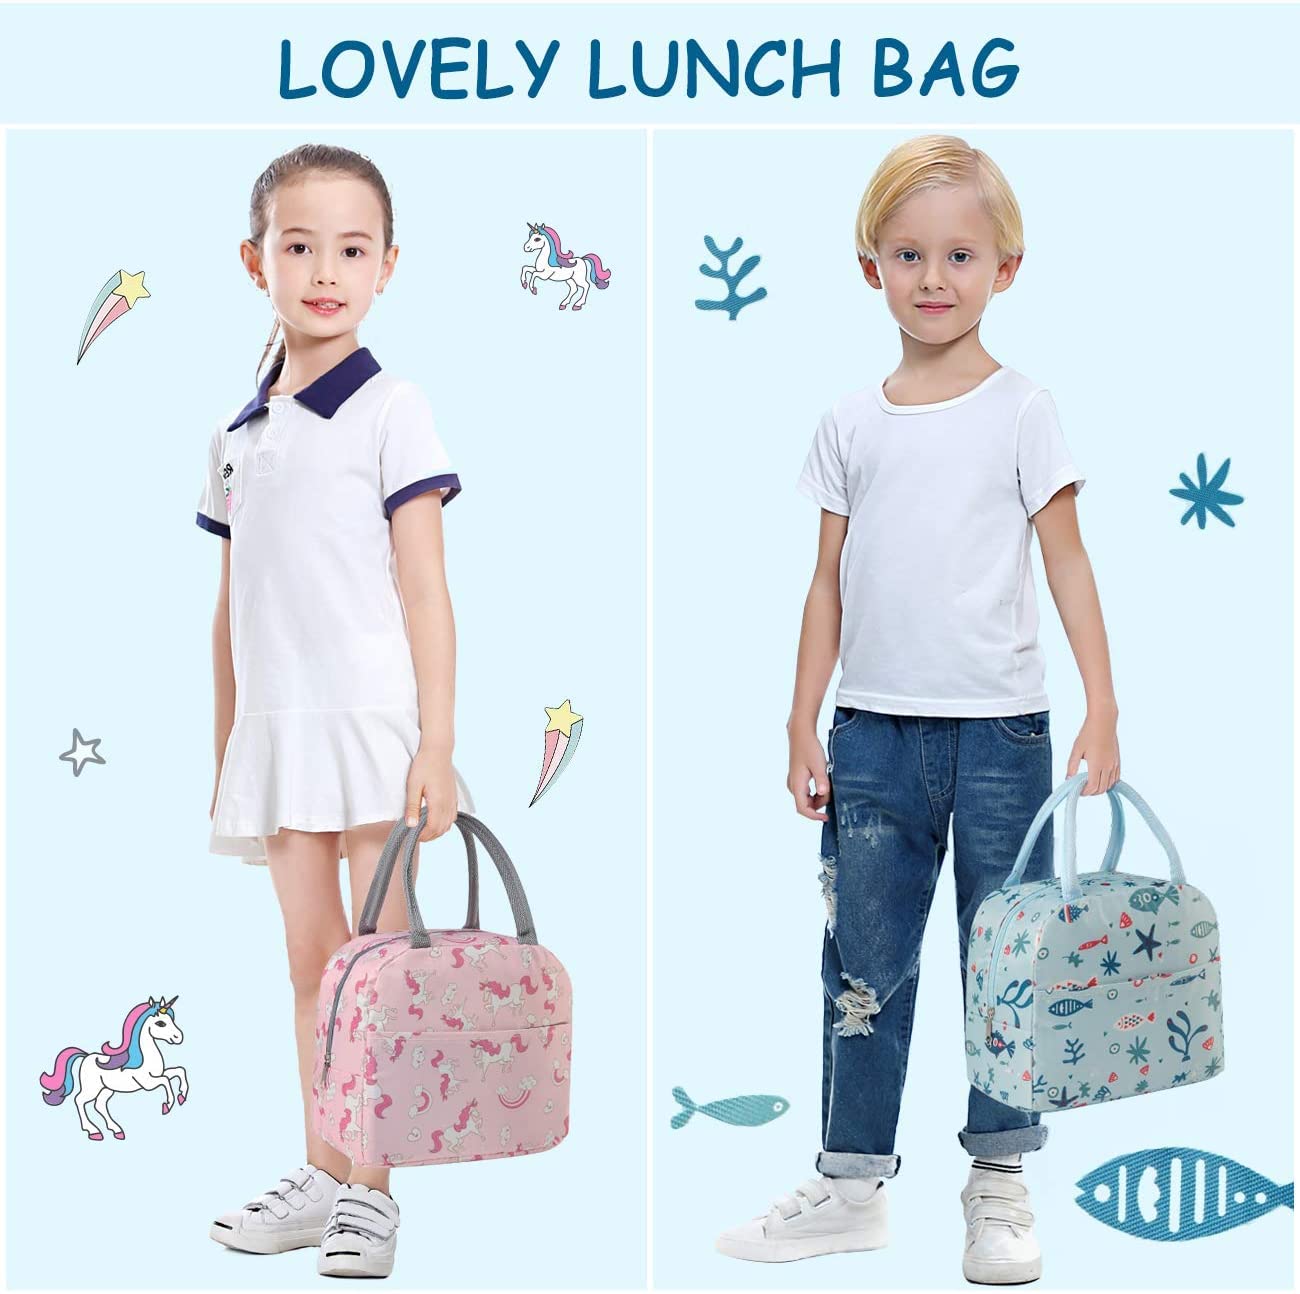 Insulated Small Lunch Bags for Women – House of quirk